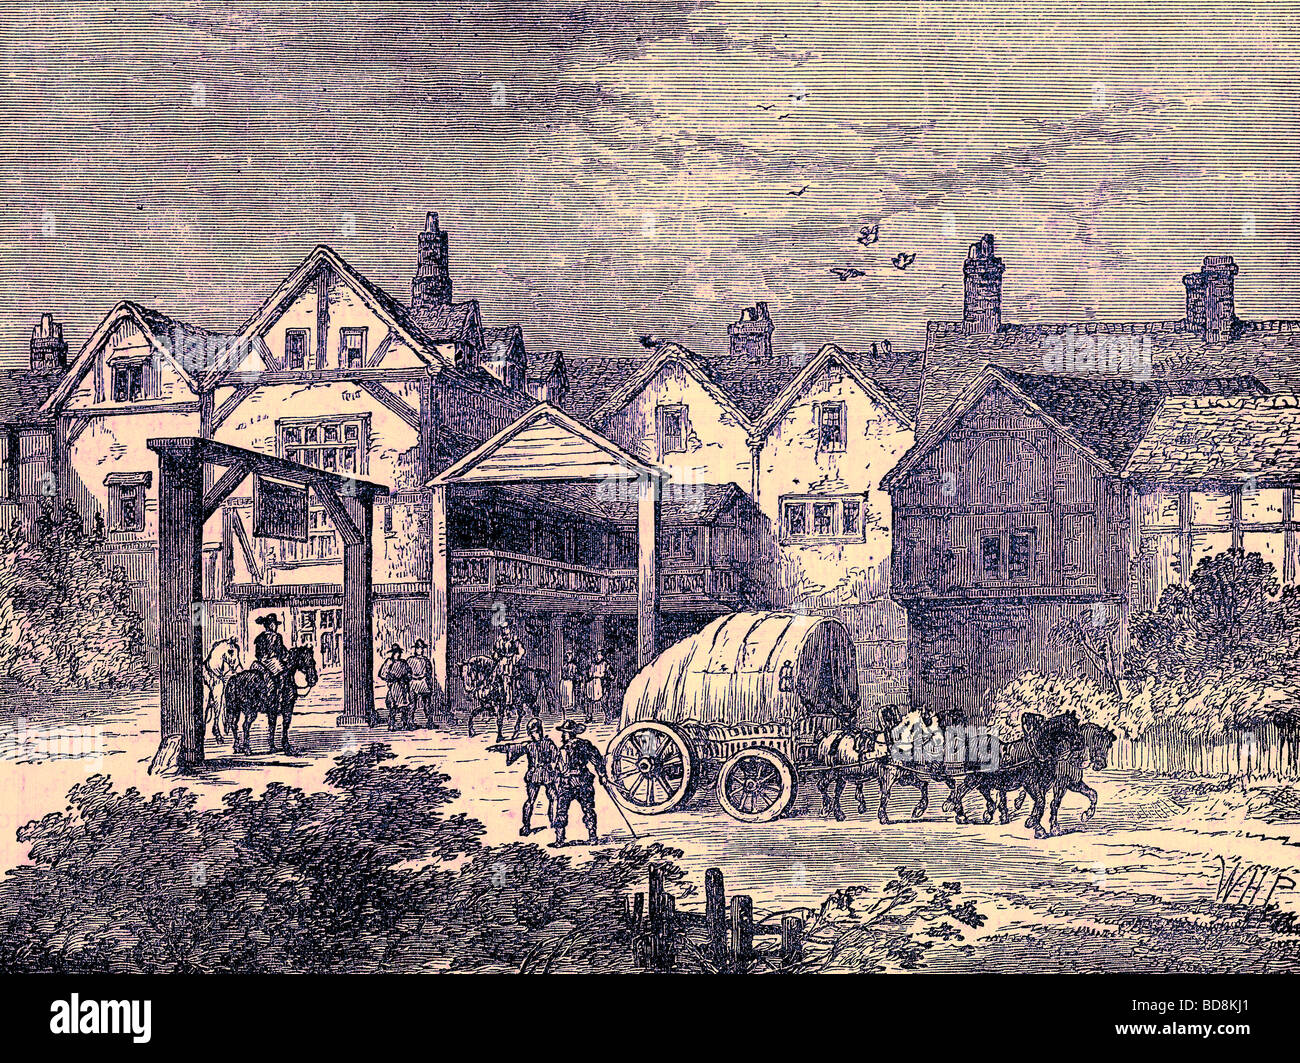 The Old Tabard Inn in the seventeenth century Illustration from Old and New London by Edward Walford Cassell c 1880 Stock Photo